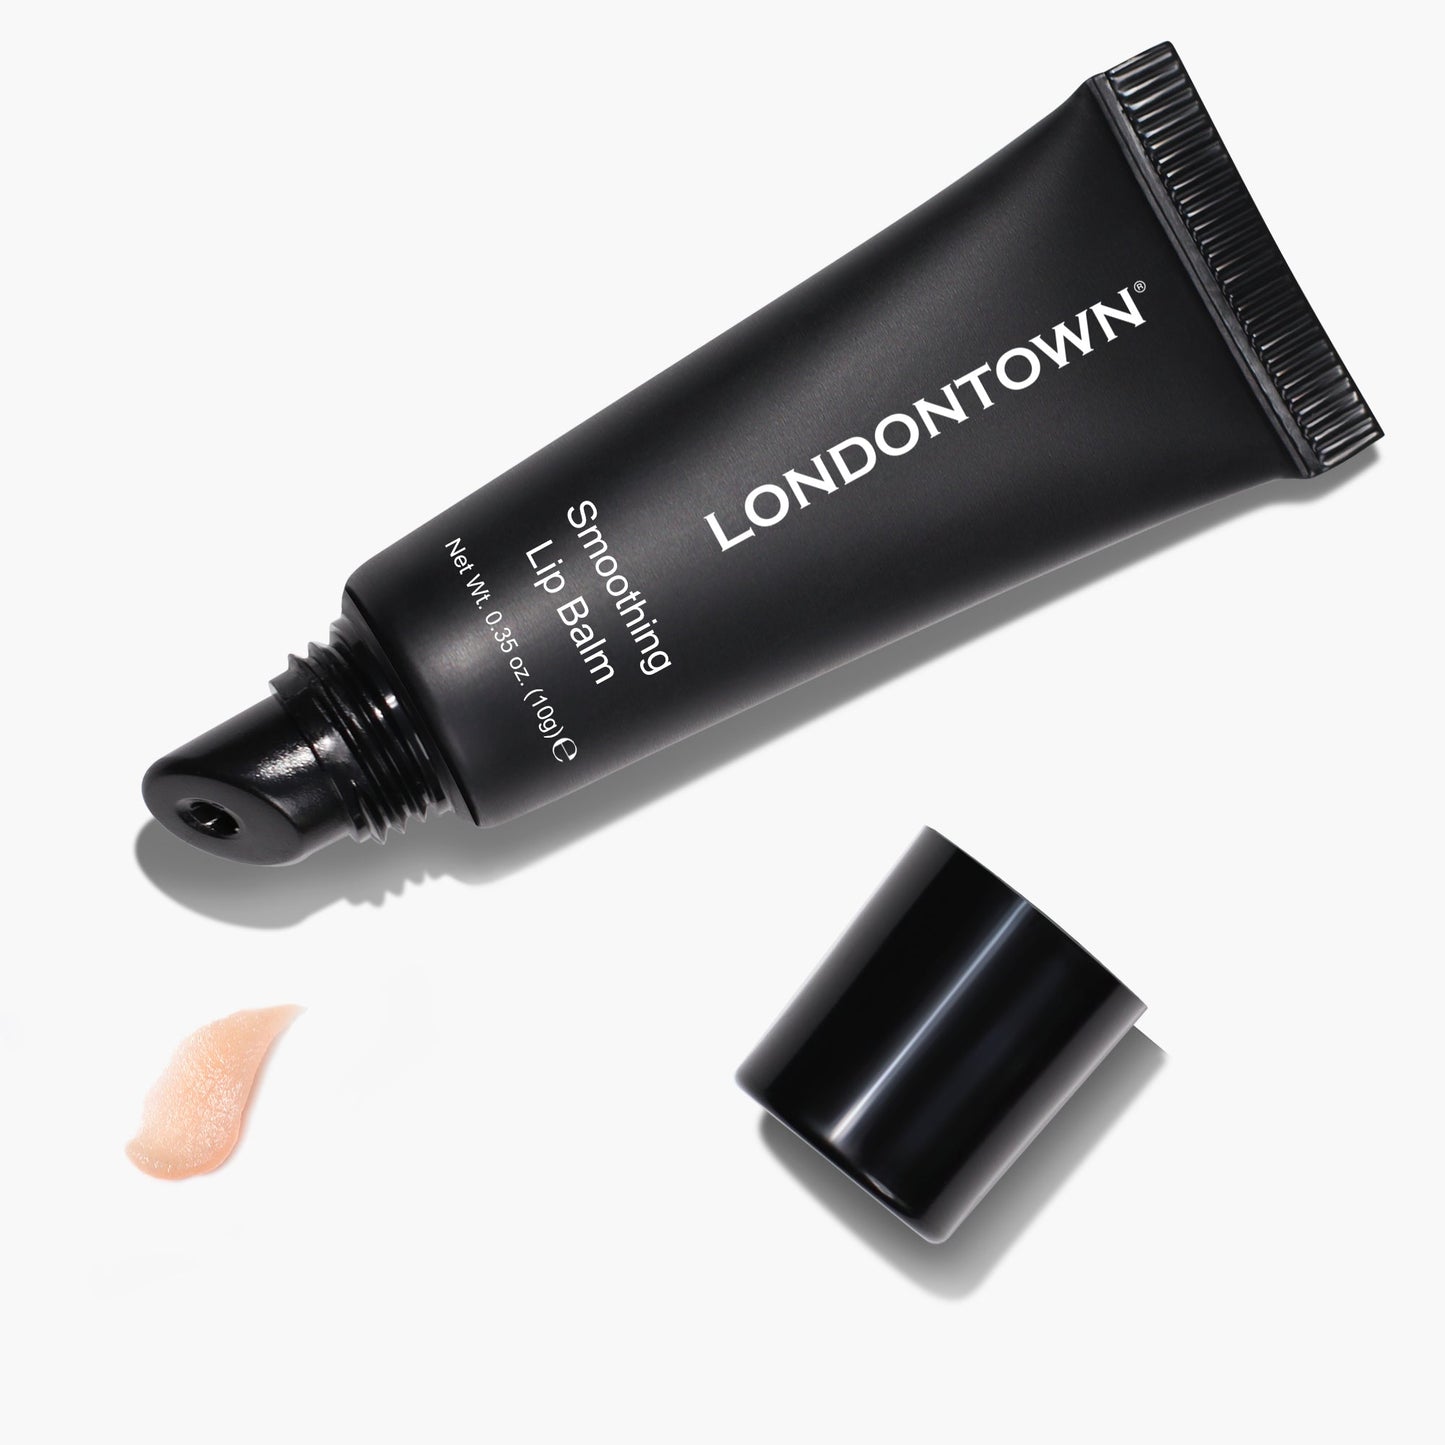 Smoothing Lip Balm by LONDONTOWN